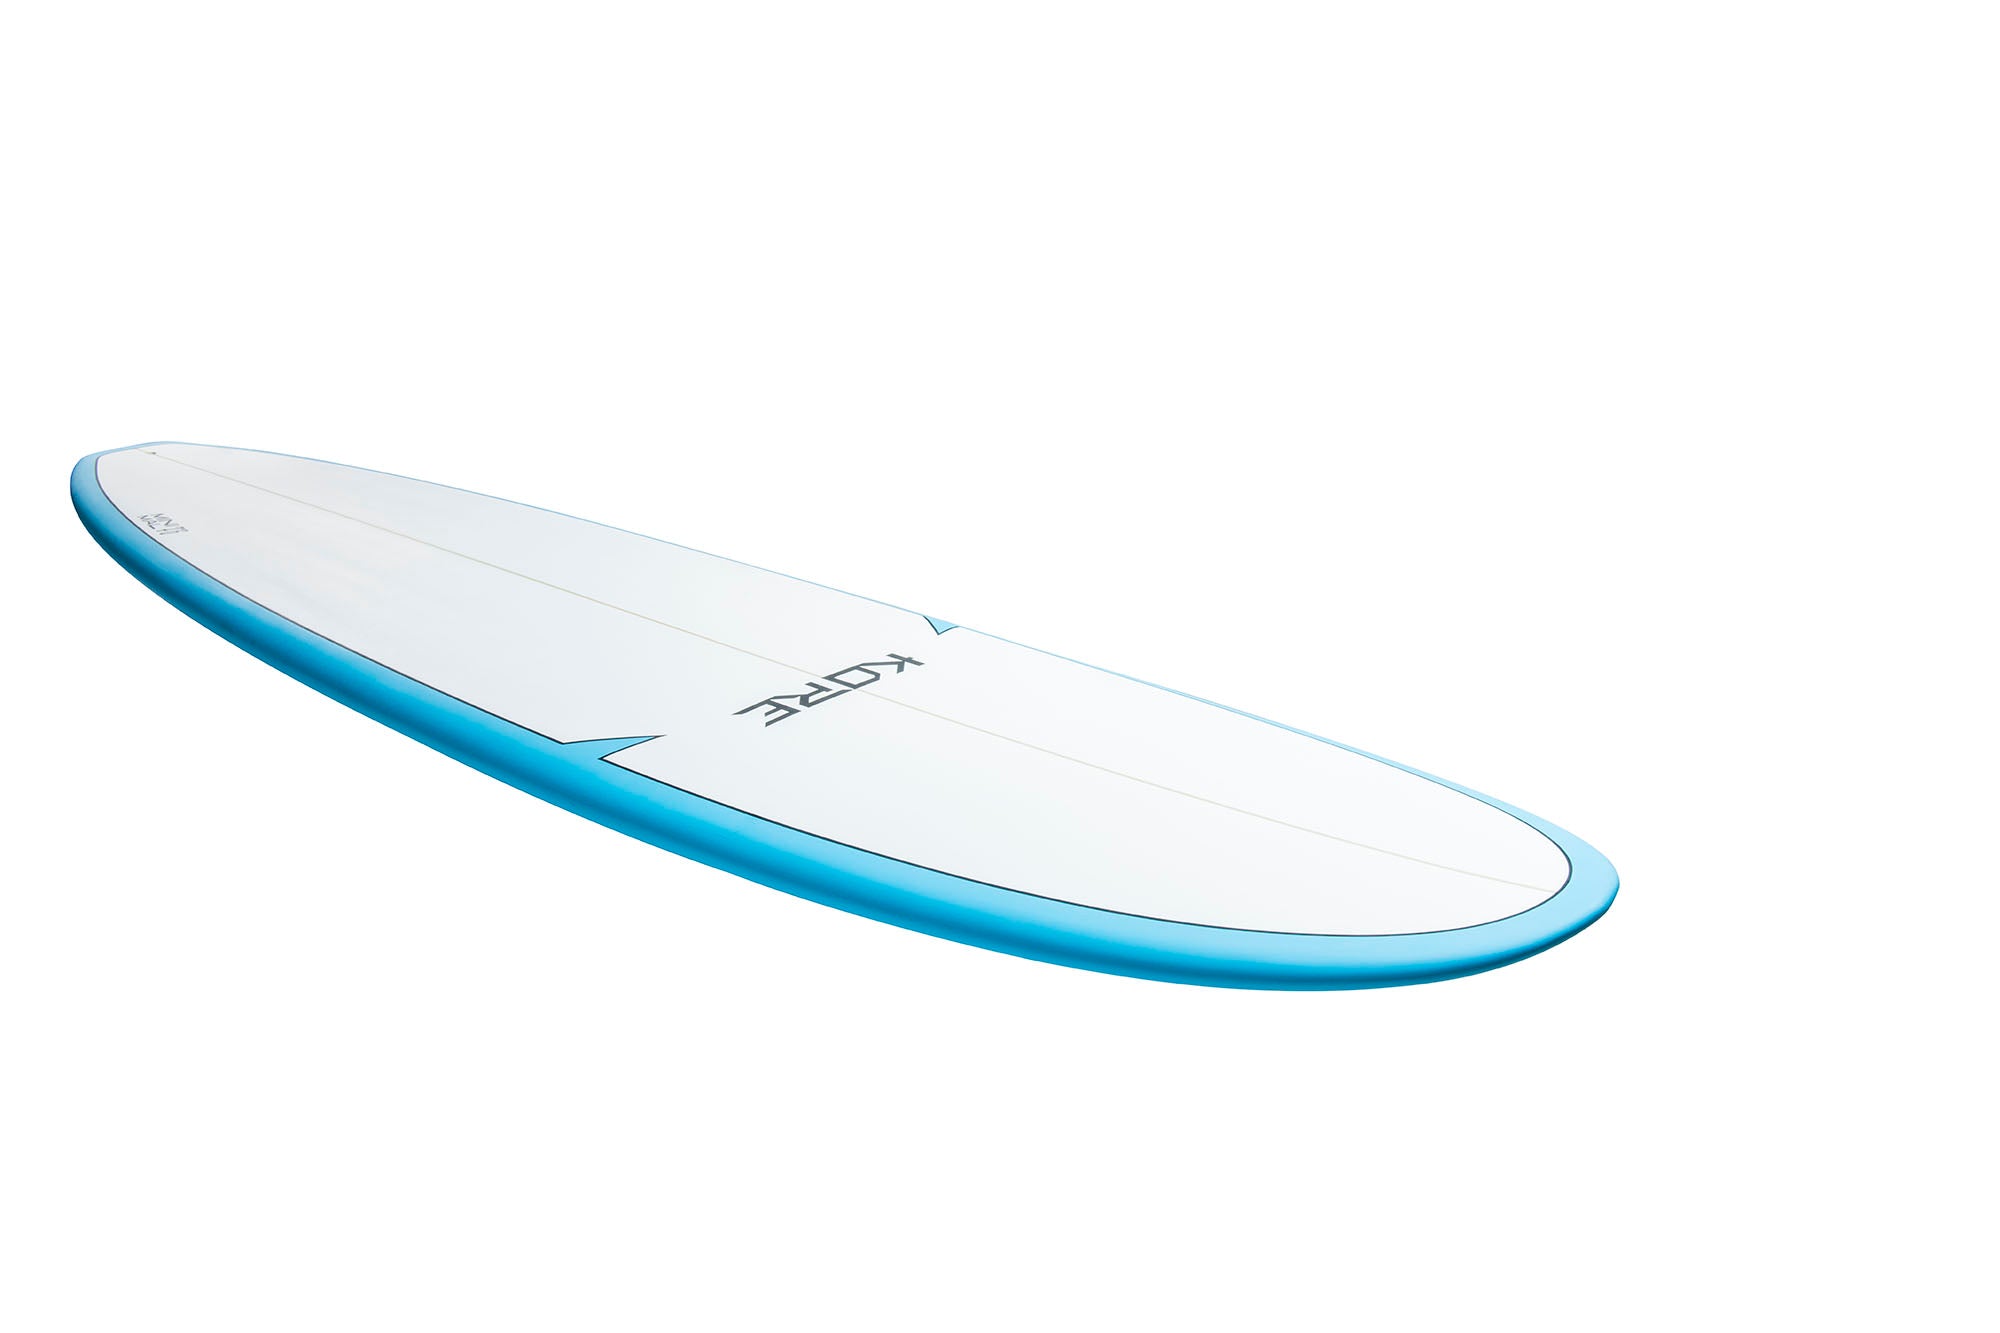 Kore Fun 7ft 2 Mid Length Surfboard White/Blue - Boards360